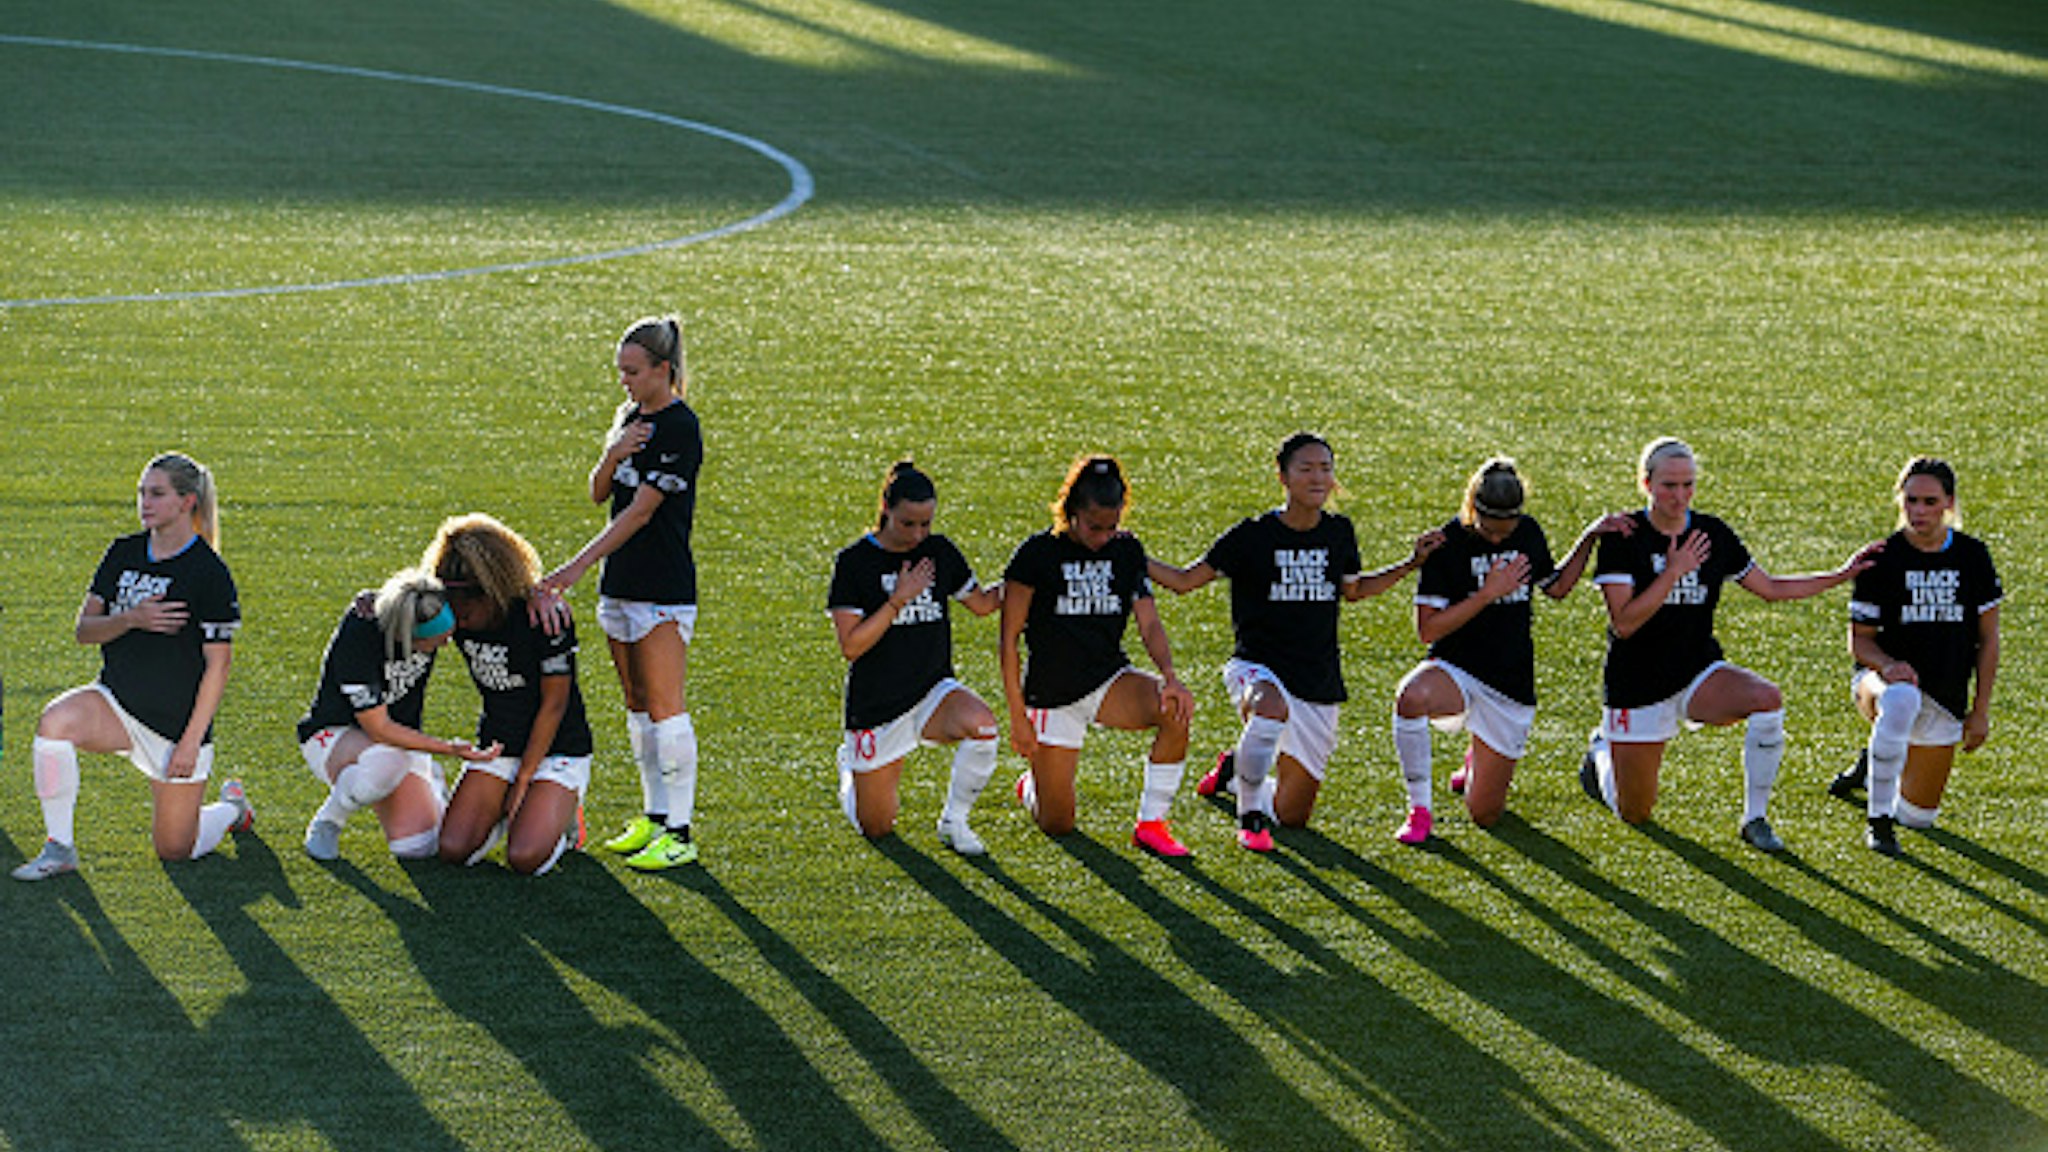 HERRIMAN, UT - JUNE 27: Julie Ertz #8 and Rachel Hill #5 console Casey Short #6 of the Chicago Red Stars as teammates kneel during the national anthem before a game against the Washington Spirit in the first round of the NWSL Challenge Cup at Zions Bank Stadium on June 27, 2020 in Herriman, Utah.